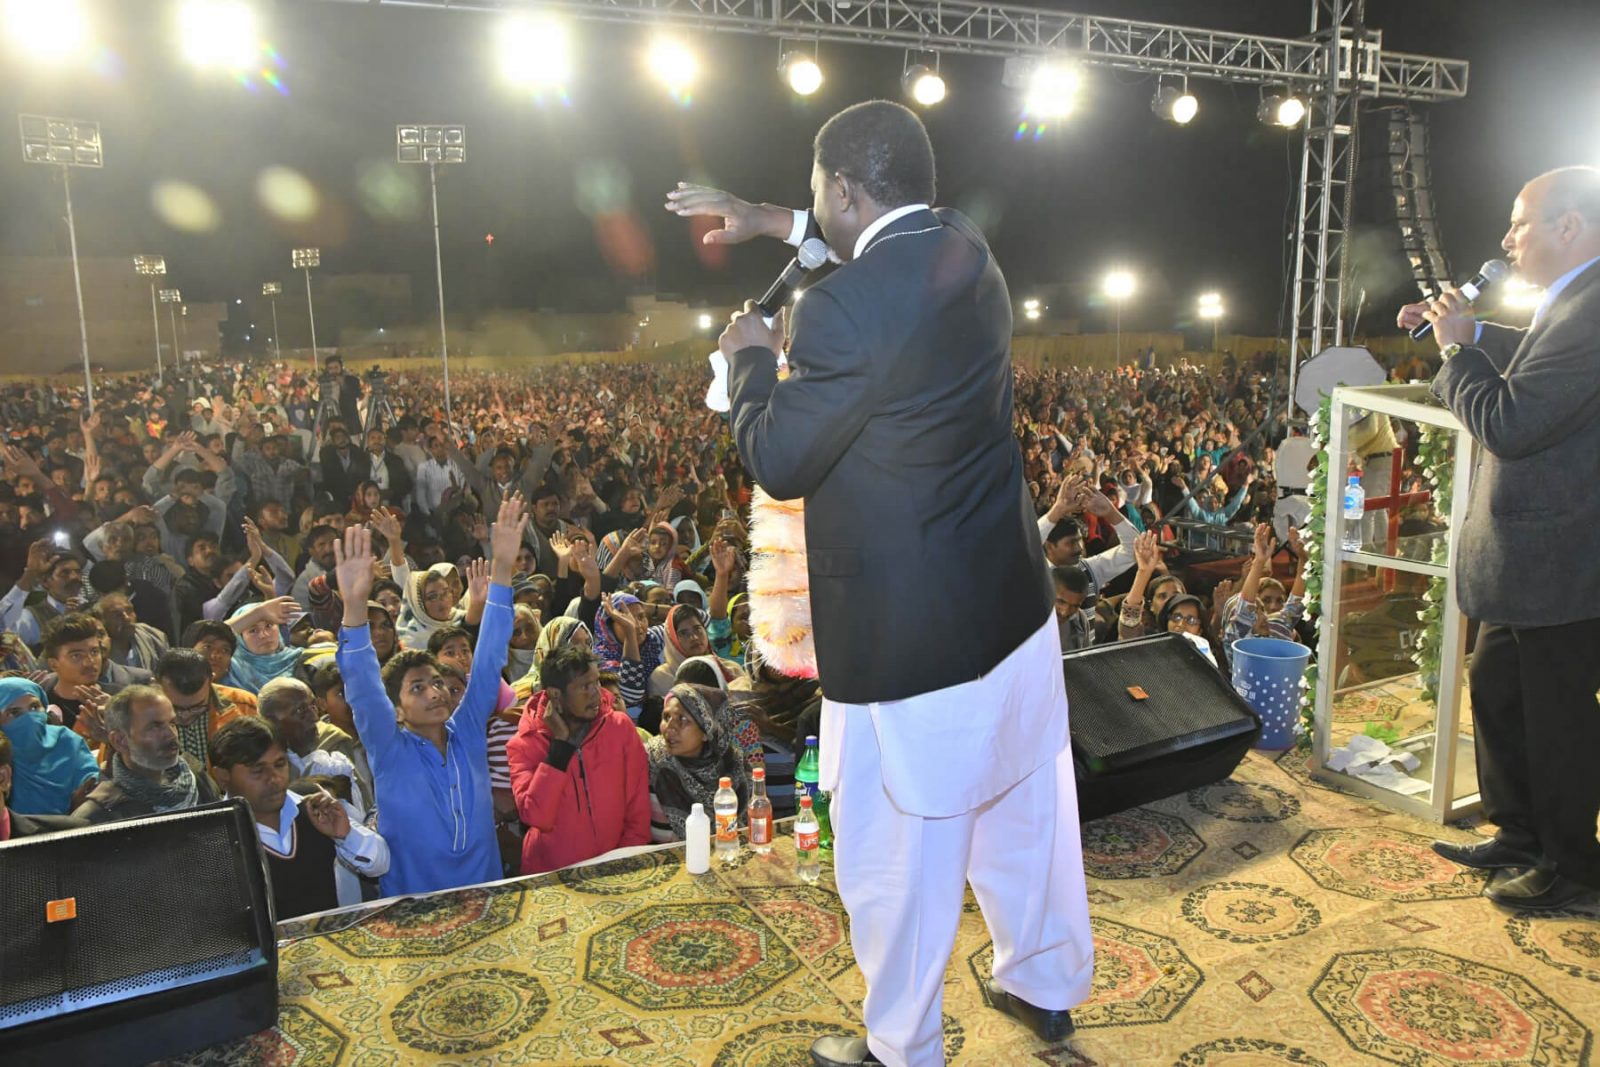 Account of miracles wrought through Bishop Agyinasare in Pakistan few weeks ago